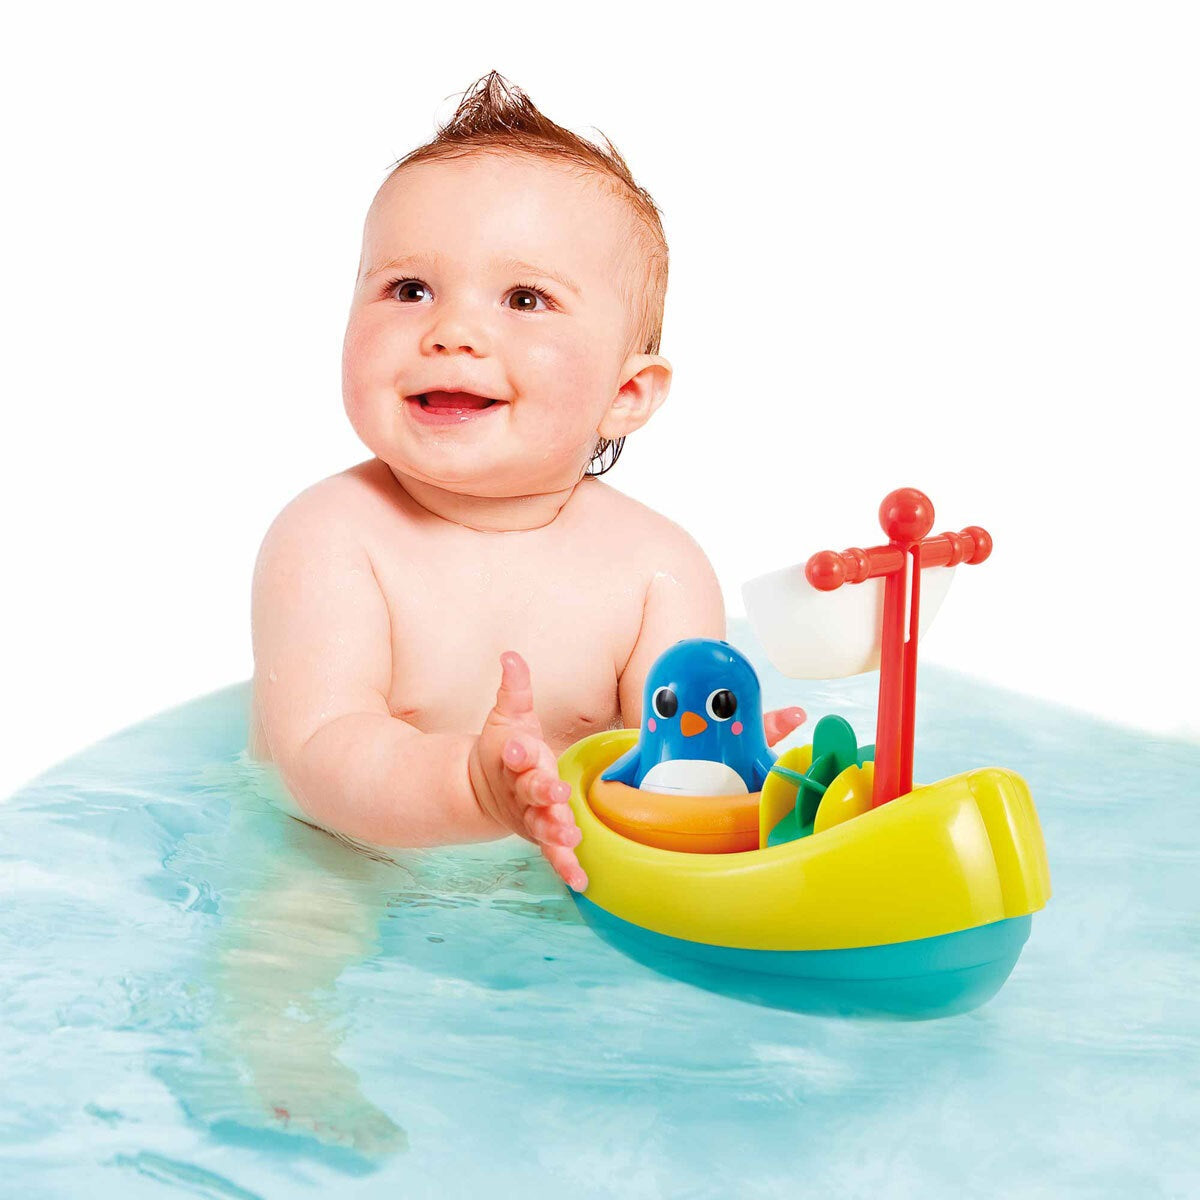 Early Learning Centre Penguin Bathtime Boat